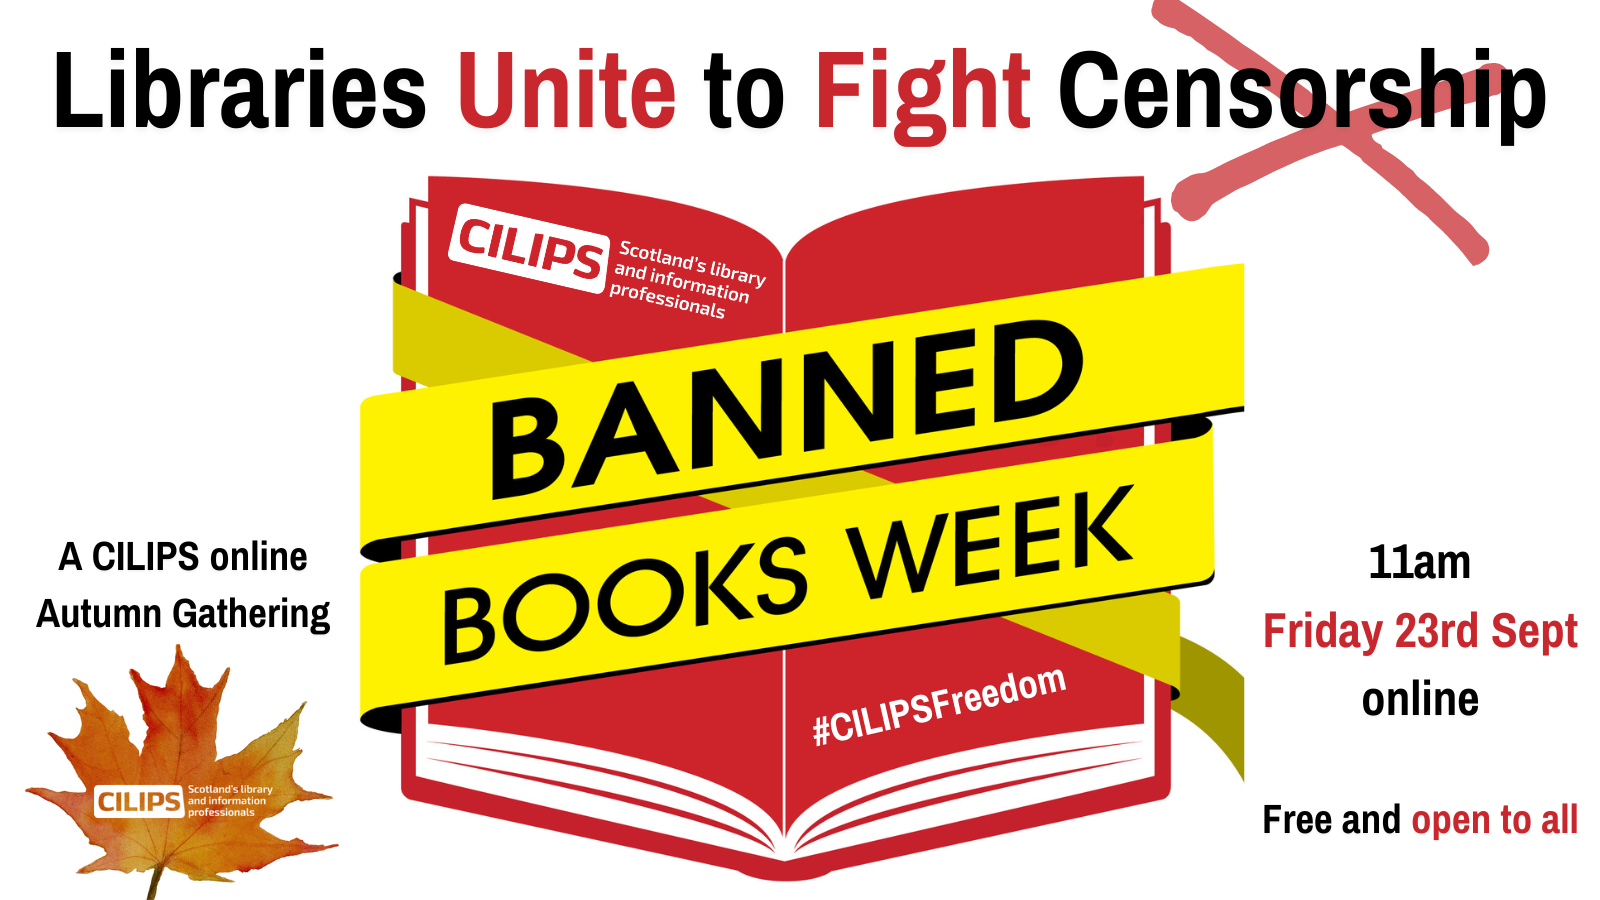 The CILIPS Libraries Unite to Fight Censorship: Banned Books Week logo, reading 11am Friday 23rd September, online, free and open to all.